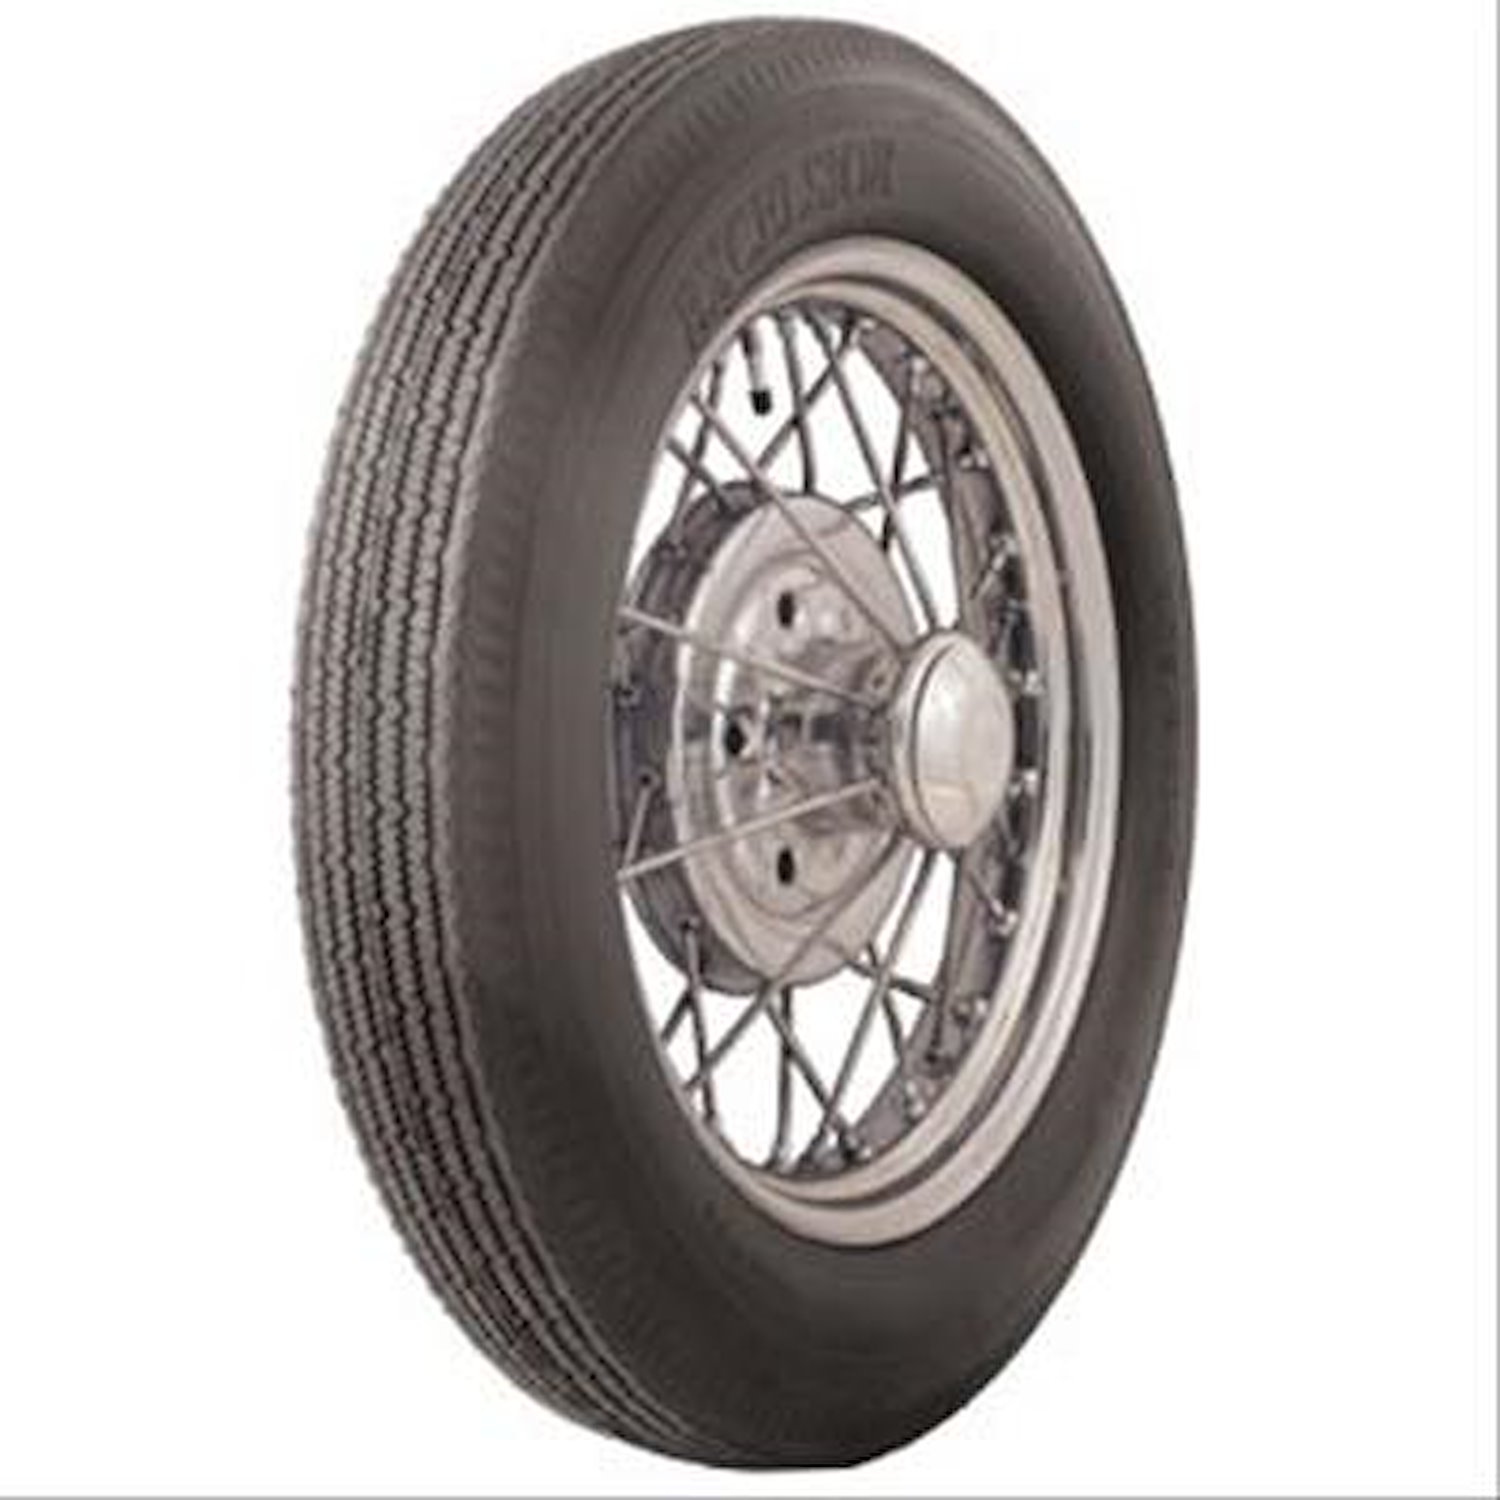 79597 Tire, Excelsior, 440-23